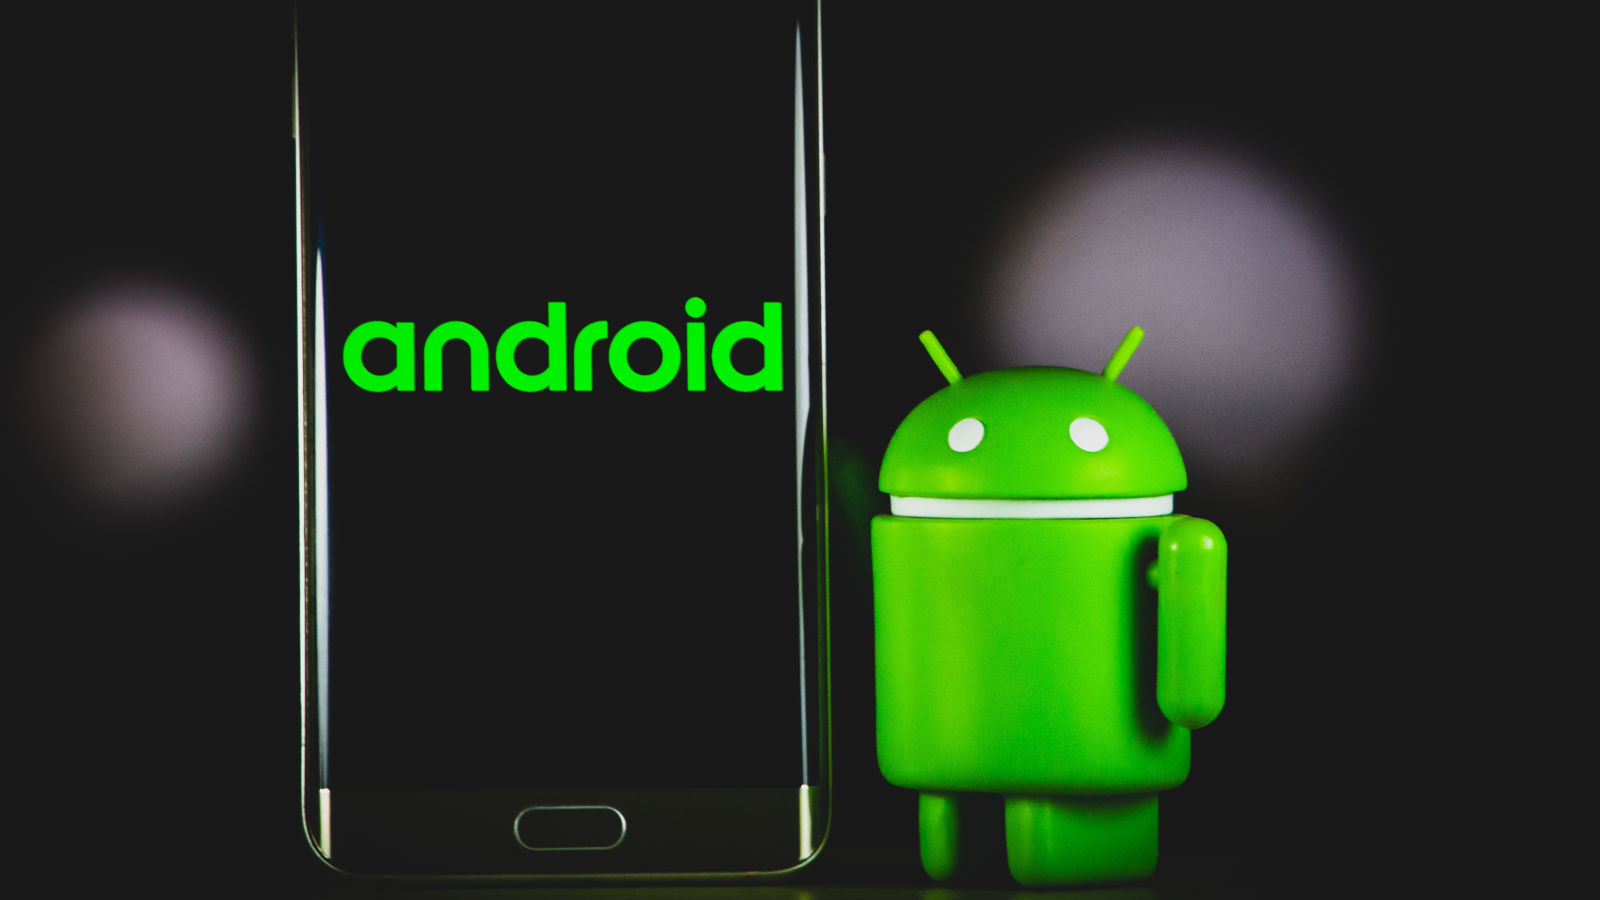 Critical bug in Android could allow access to users' media files